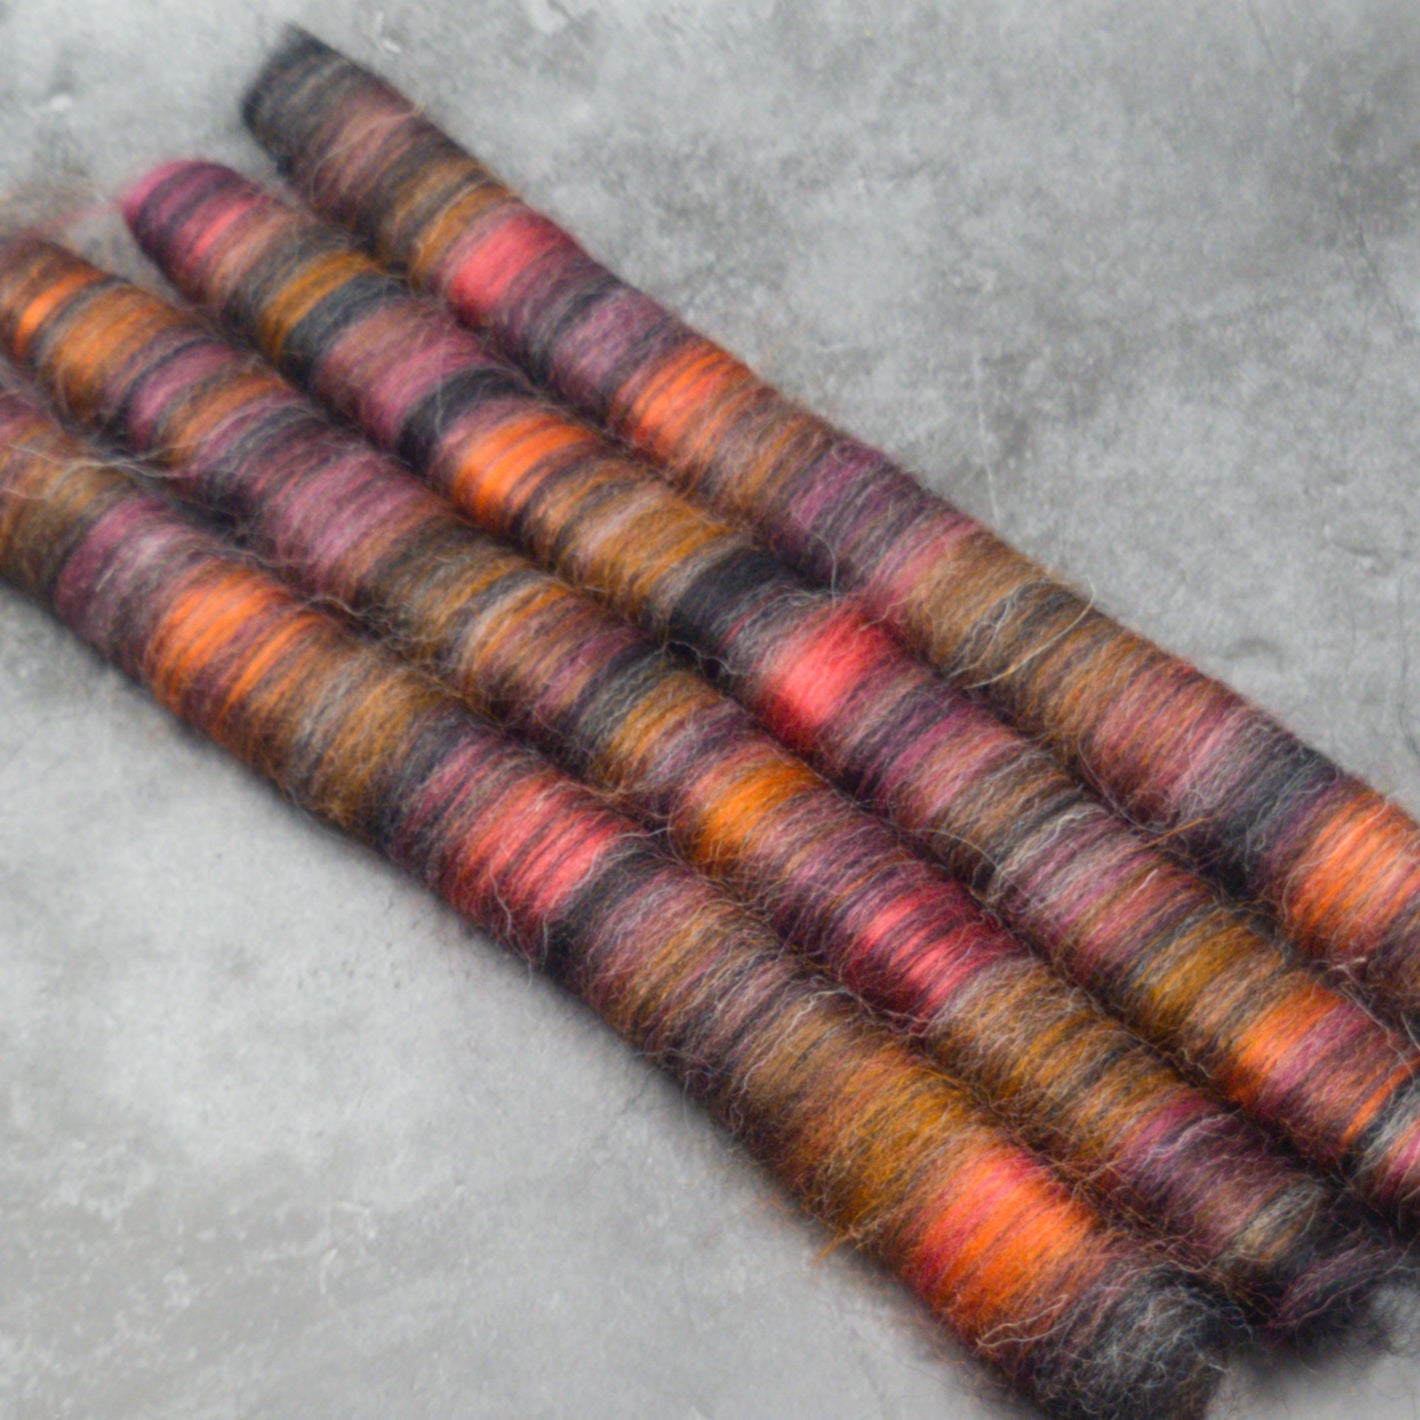 Rolags (or Punis) for spinning, Bursledon, Wool and Bamboo Limited Edition